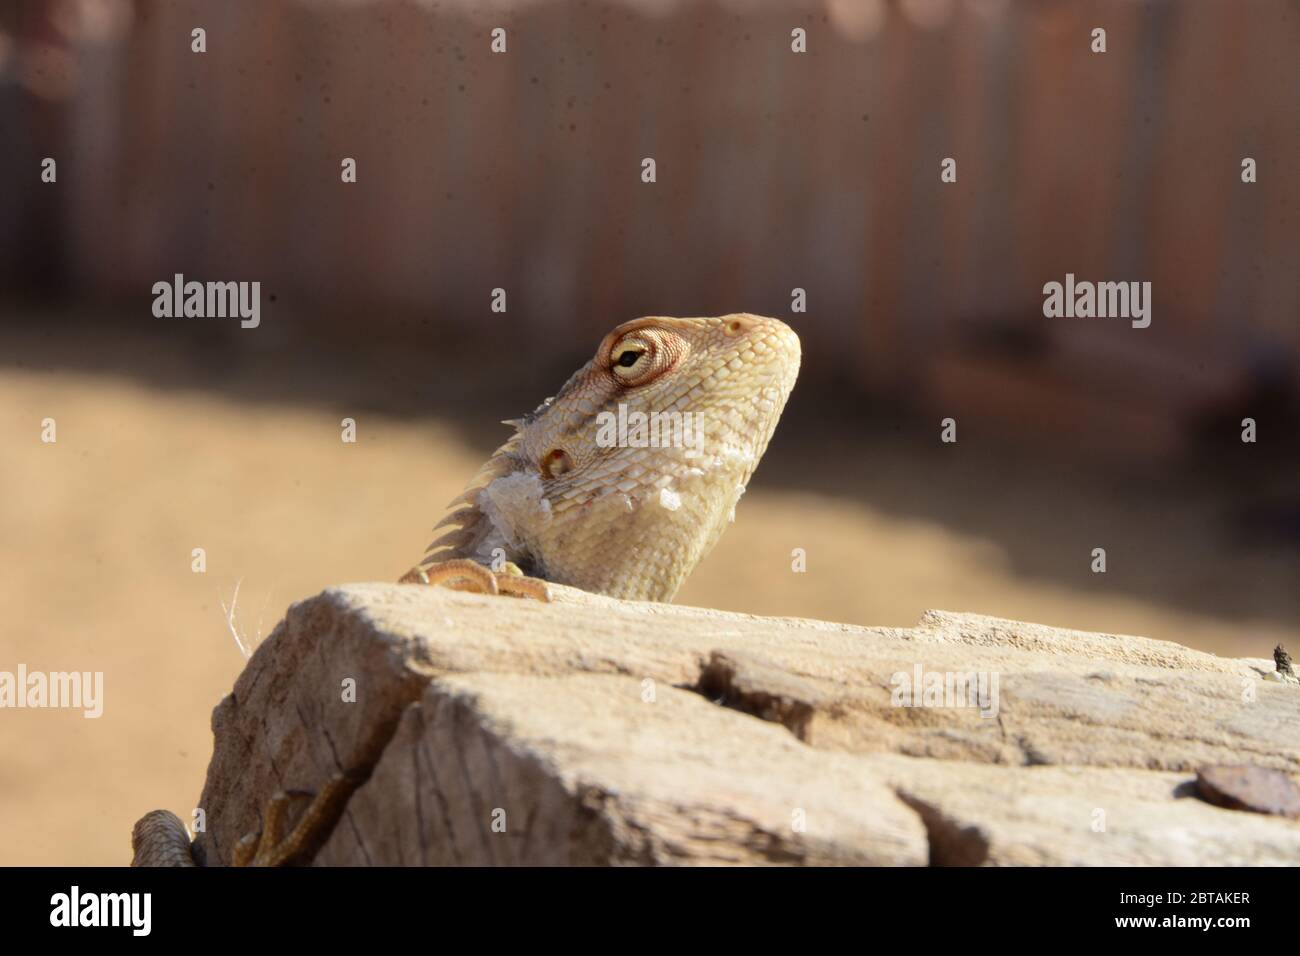 A chameleon sitting on the wall waiting to eat Stock Photo